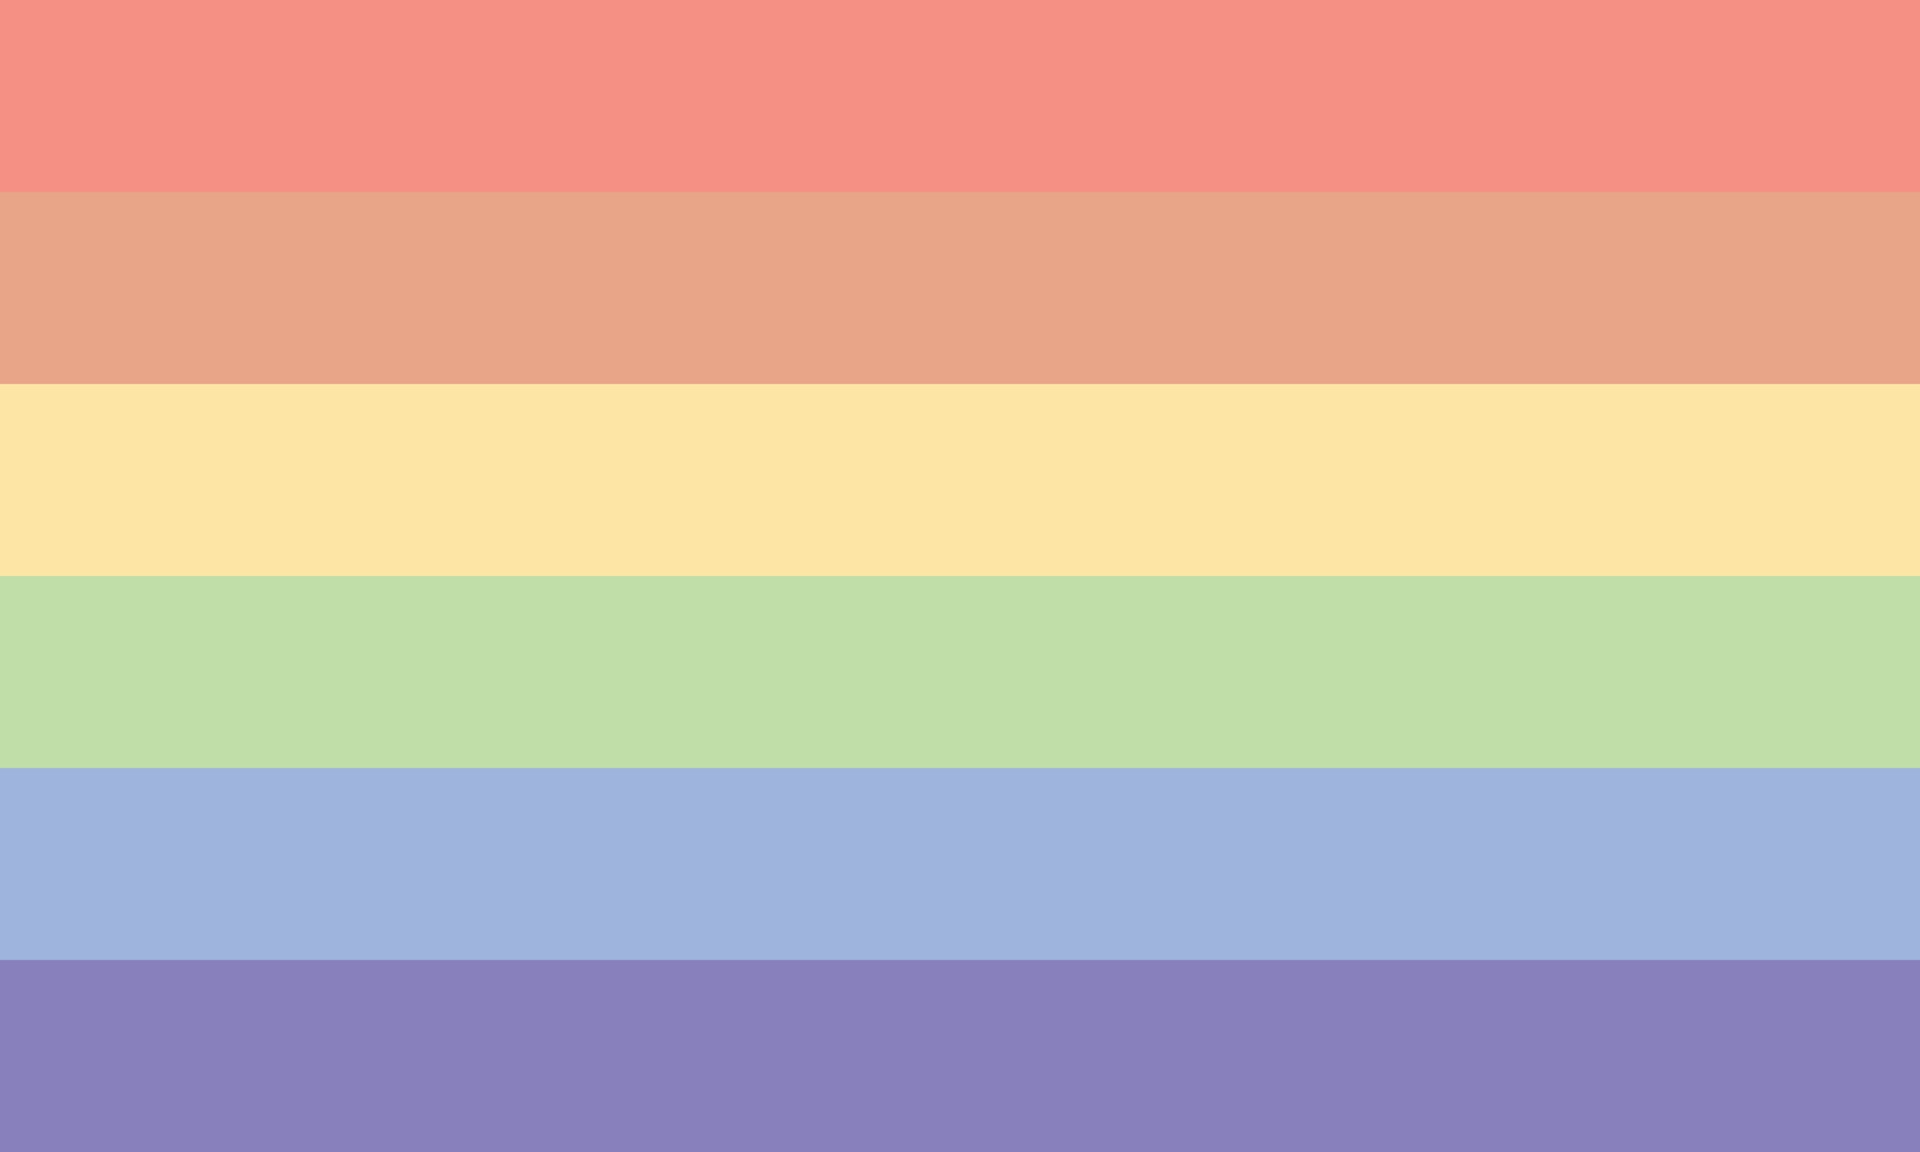 A rainbow colored image - Pansexual, LGBT